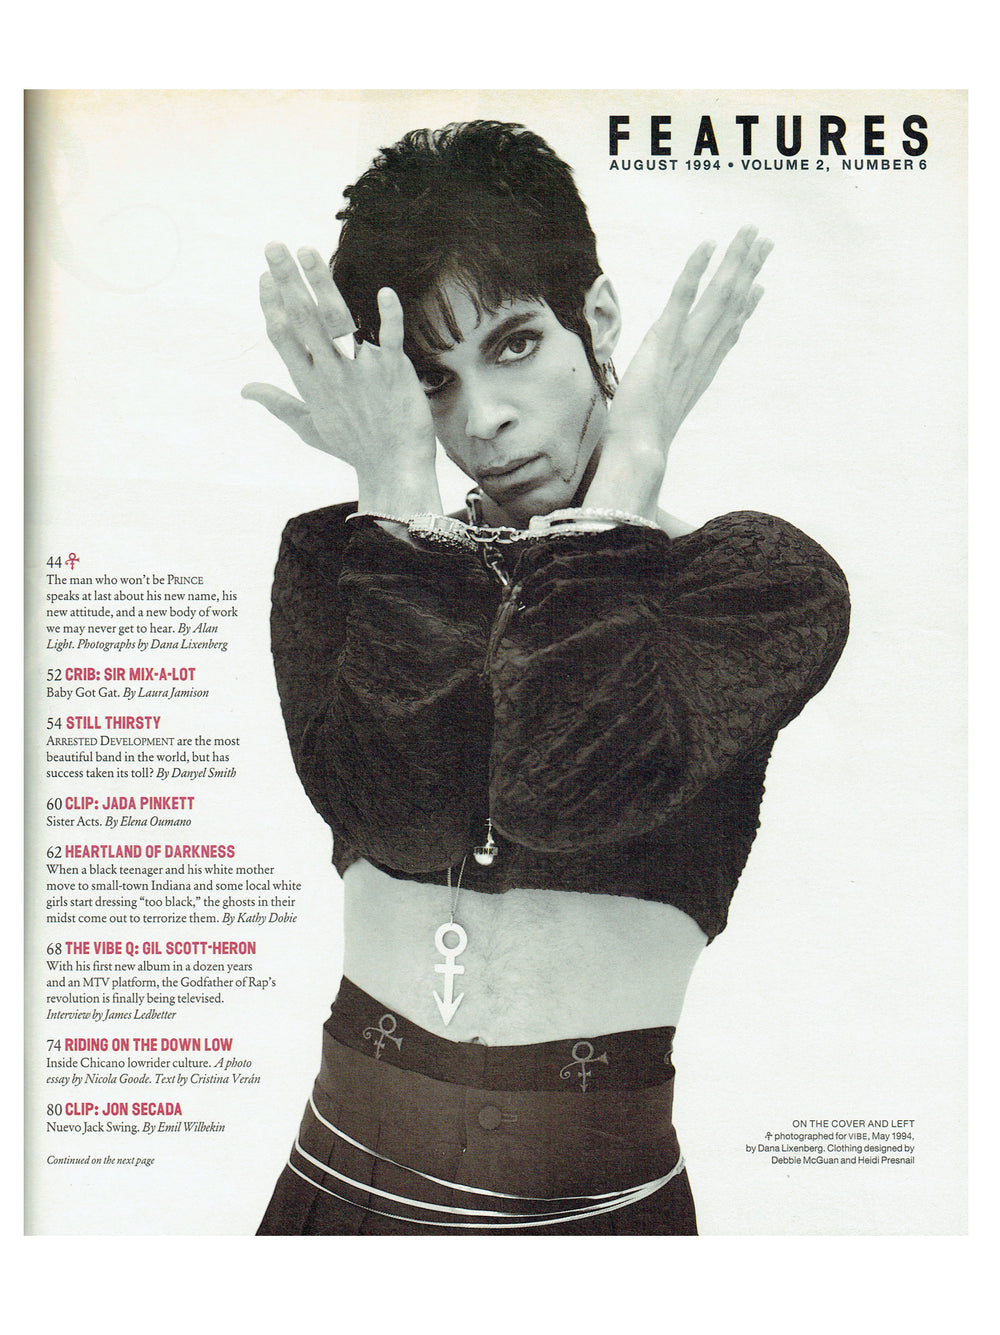 Prince VIBE Magazine August 1994 Cover & 1 Page Features & 7 Page Article Incredible